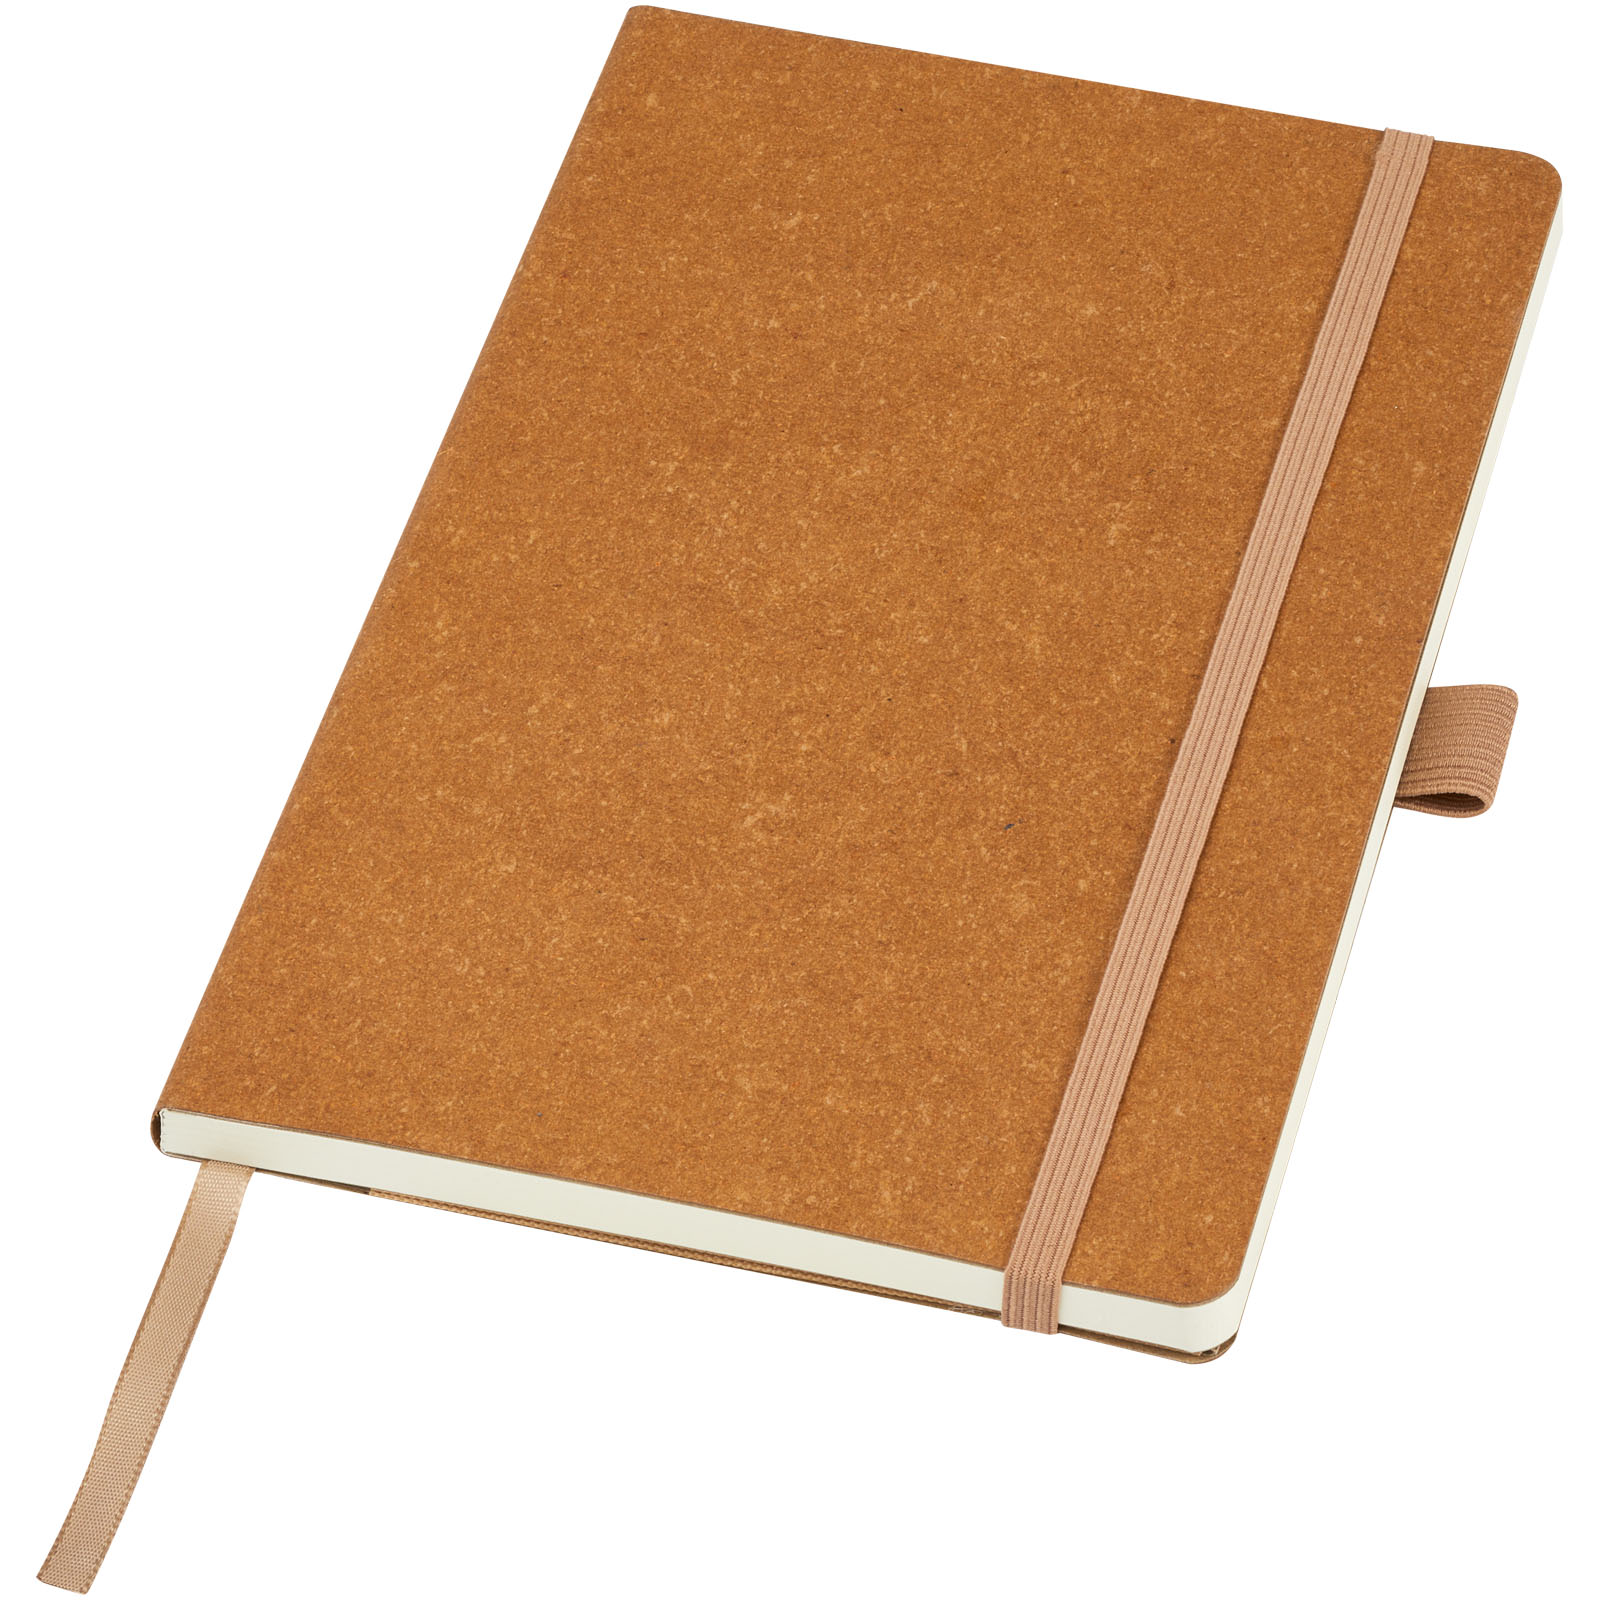 Notebooks & Desk Essentials - Kilau recycled leather notebook 